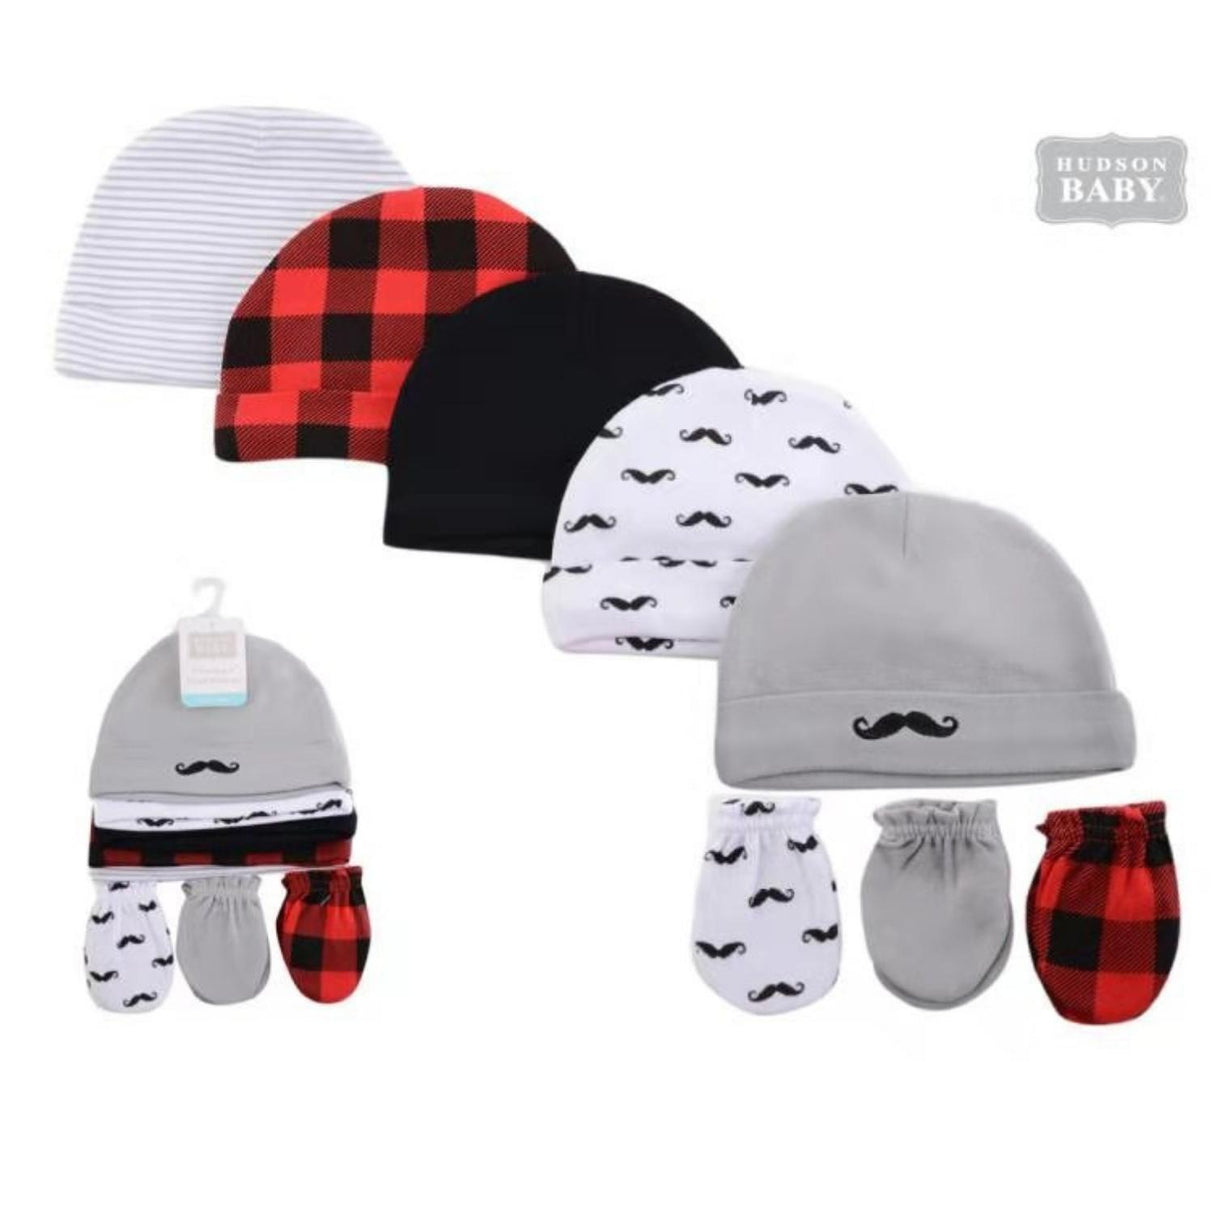 Hudson Baby Premium High Quality Cotton Caps And Mittens Set